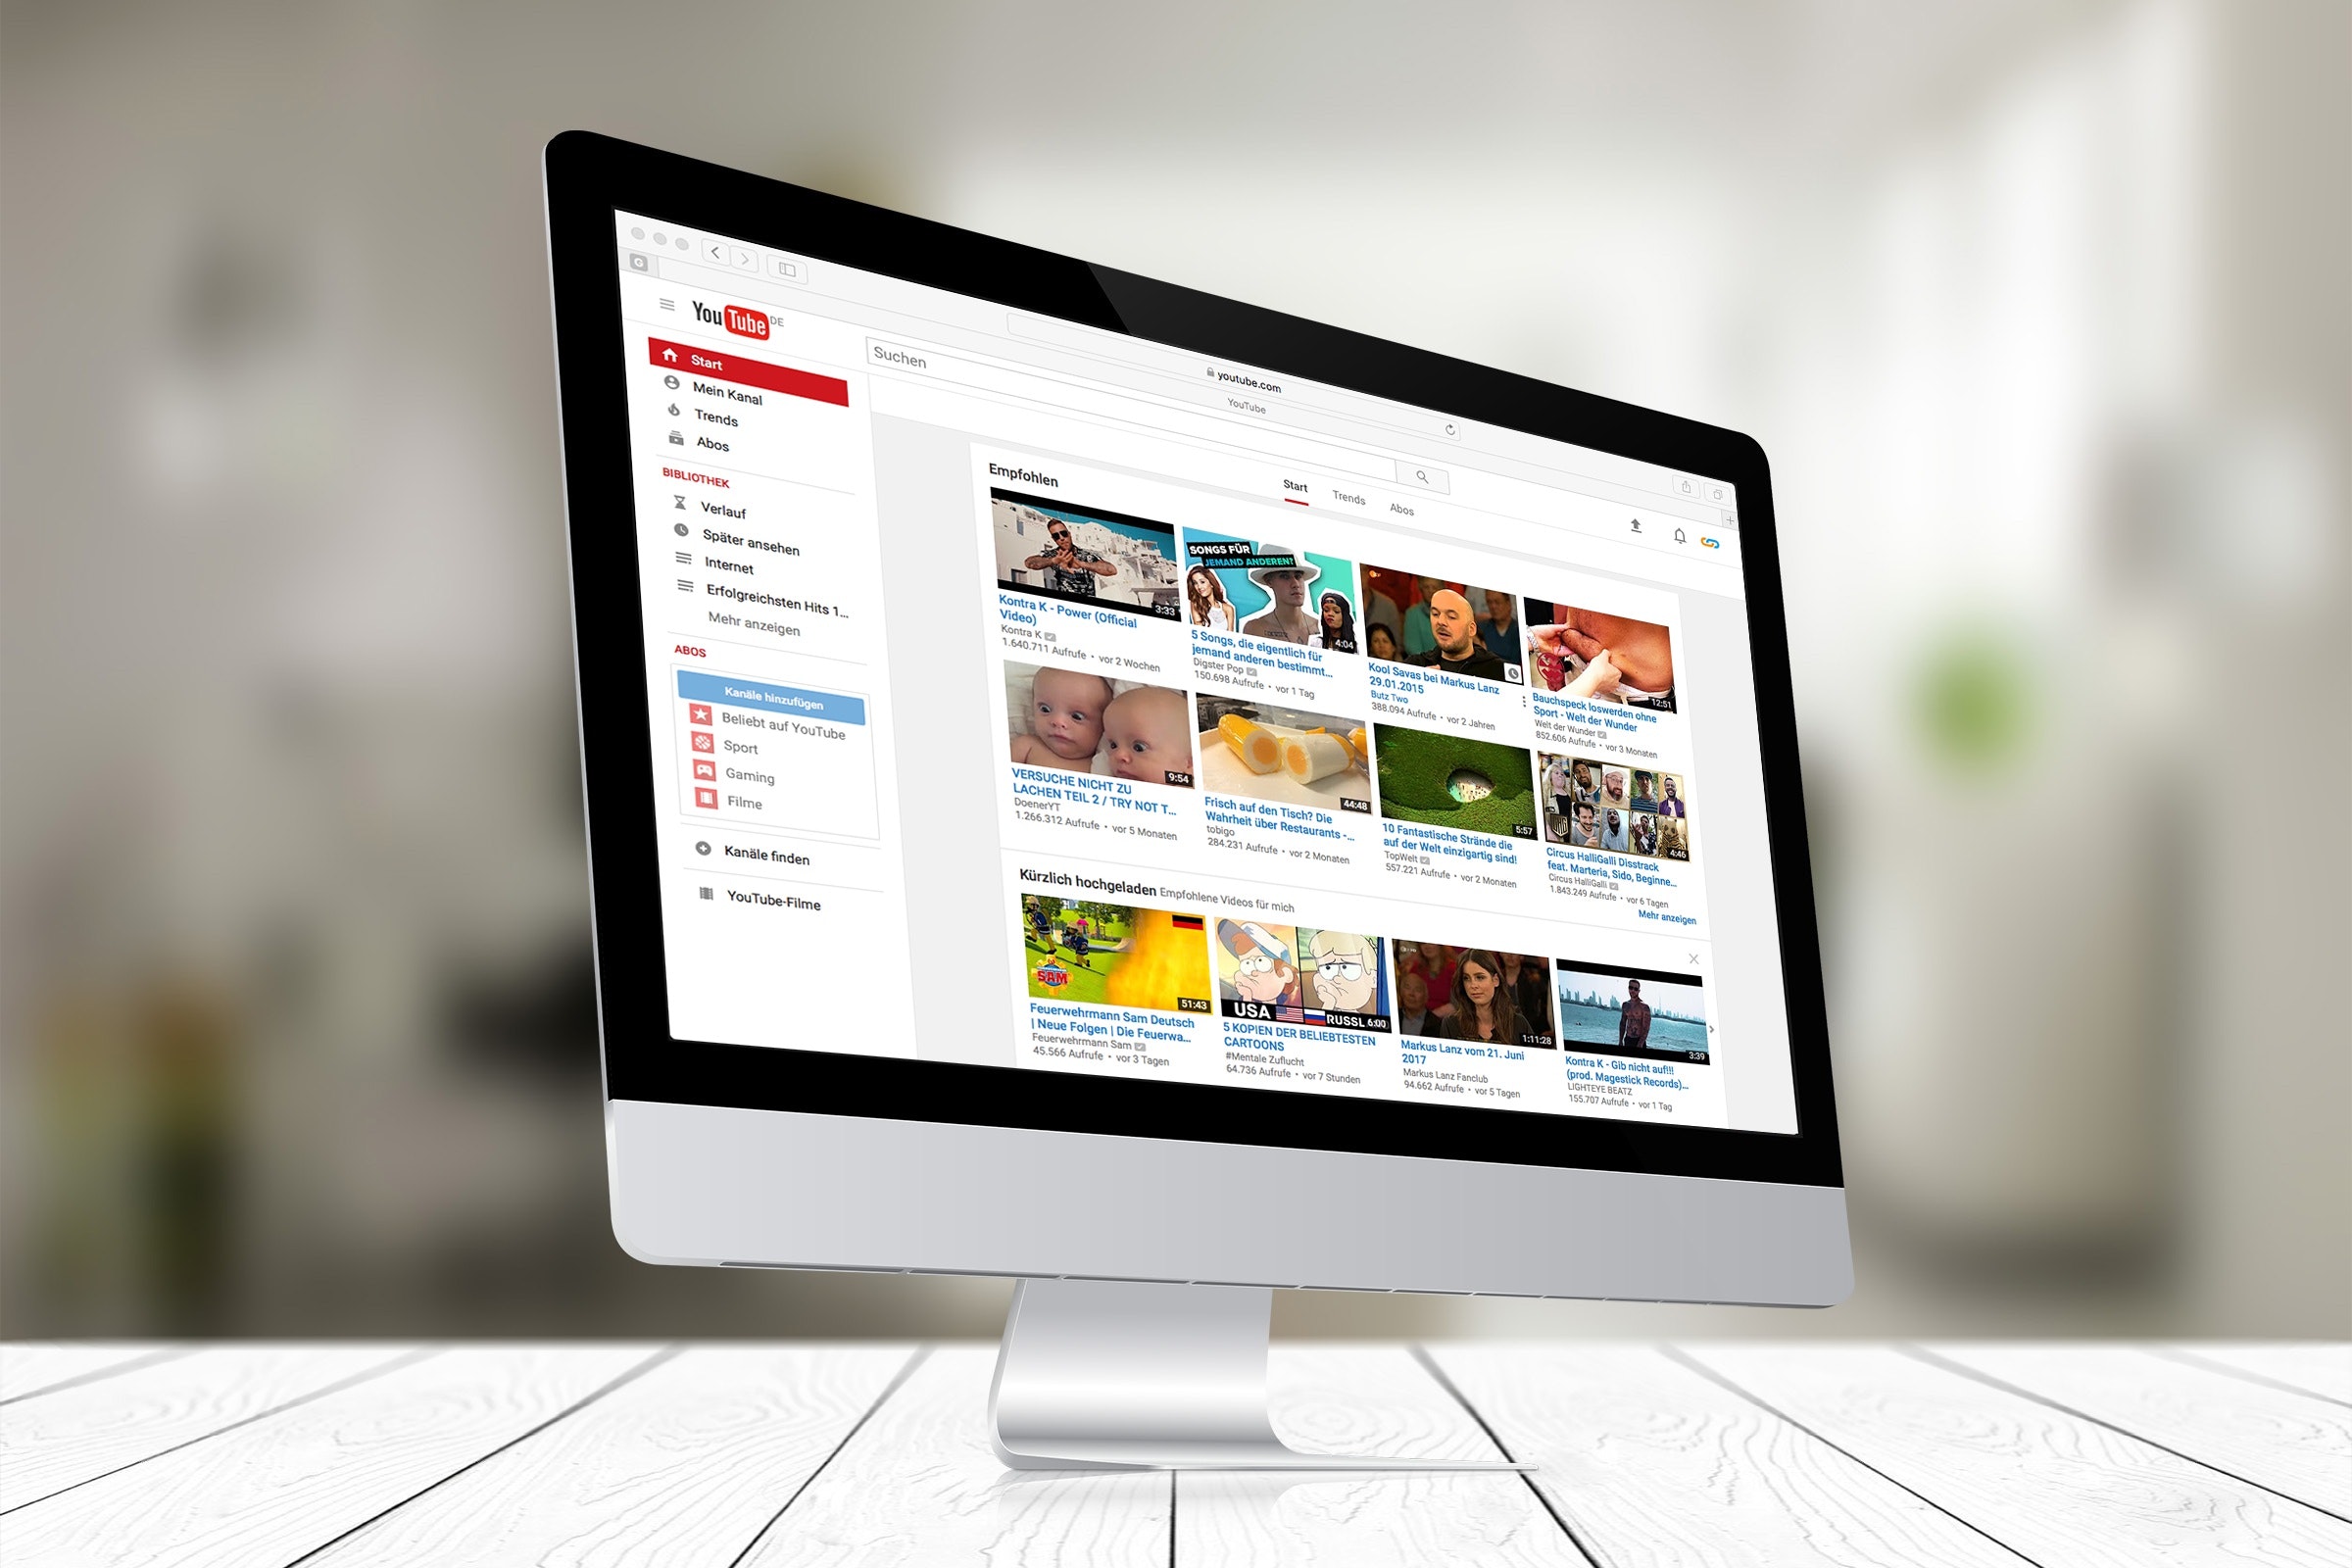 How to Create a Playlist on YouTube | Digital Trends